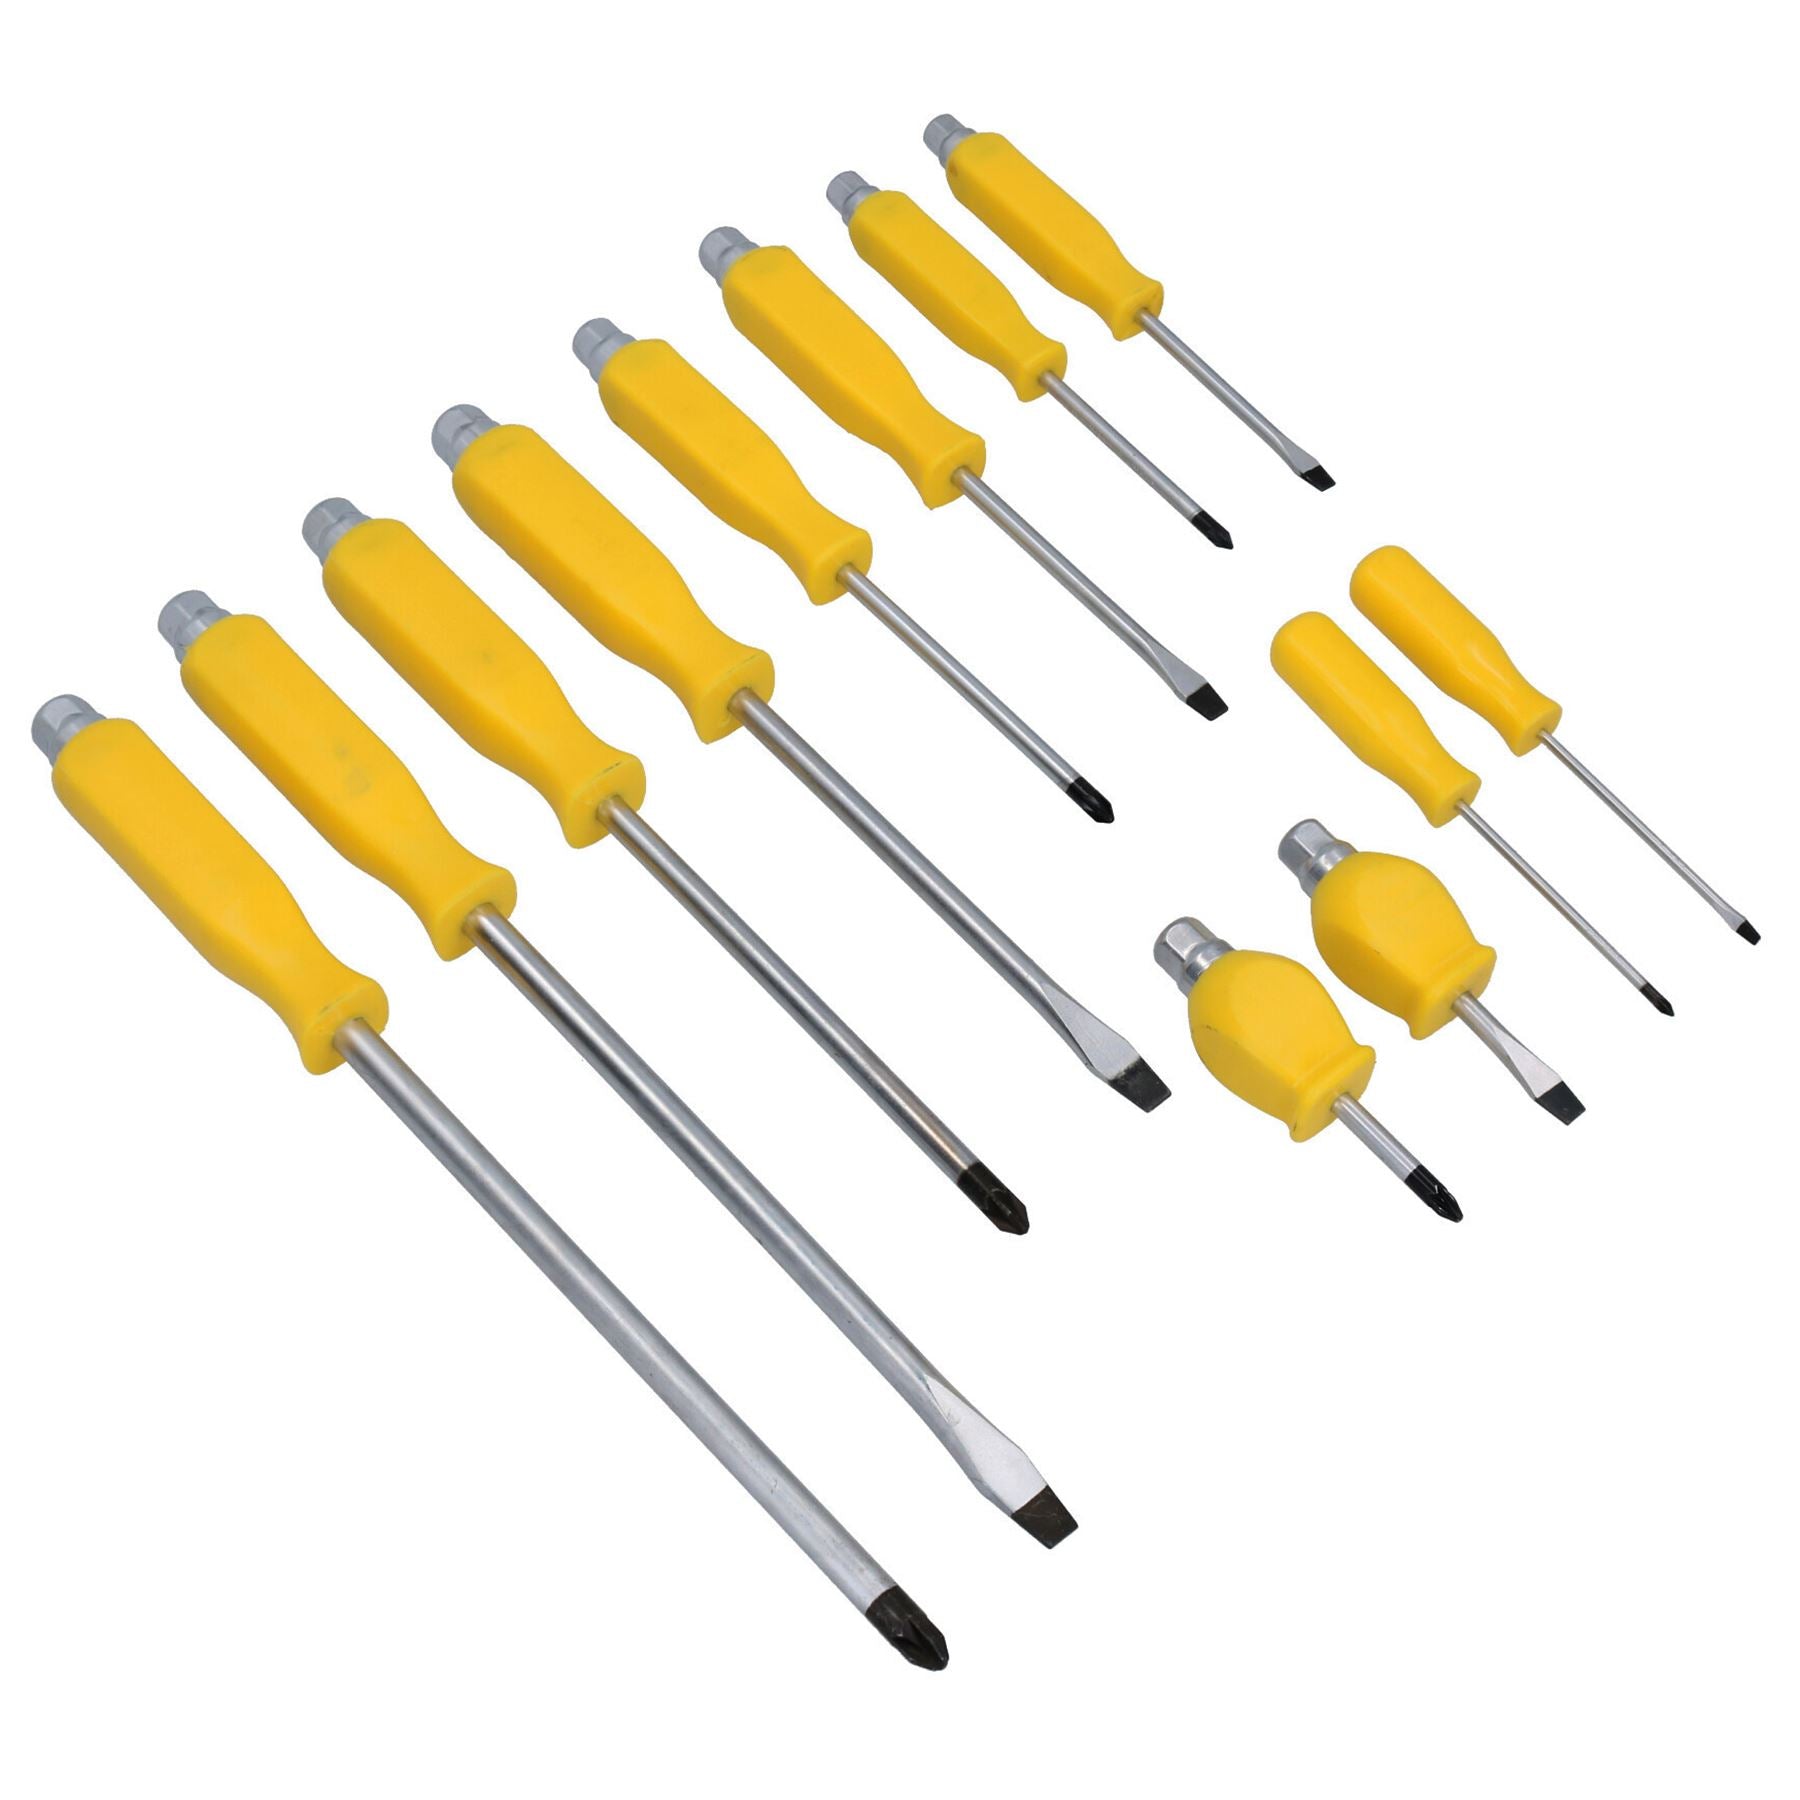 12pc Pozi Slotted Flat Screwdriver Set Magnetic Impacted Tips with Hex Shank